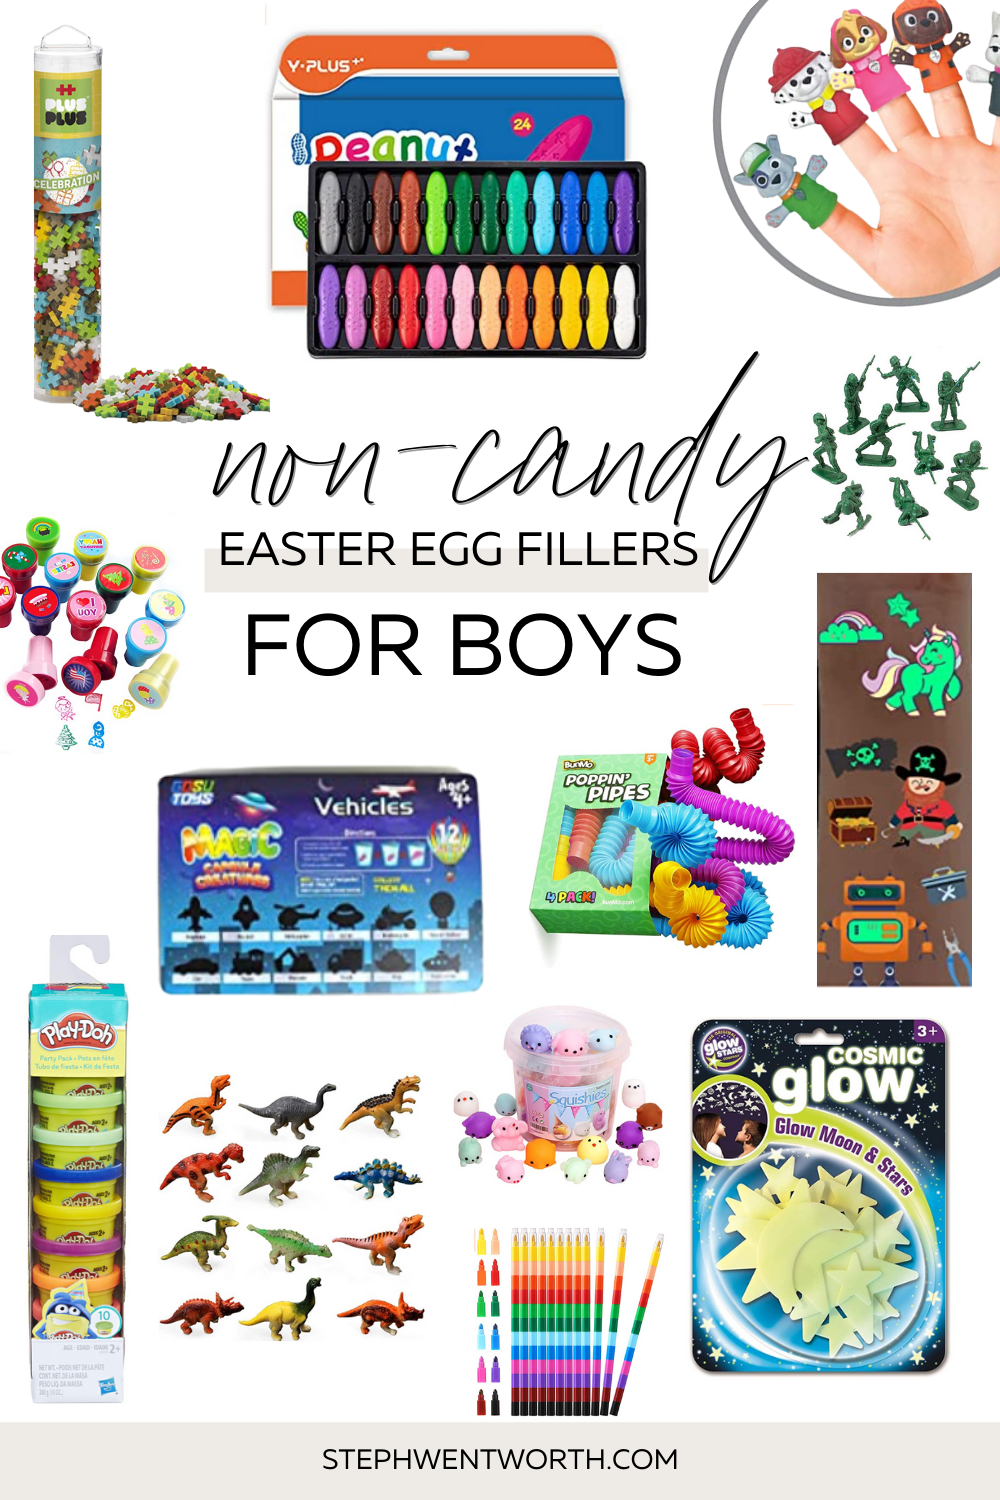 Non Candy Easter Egg Fillers for Boys